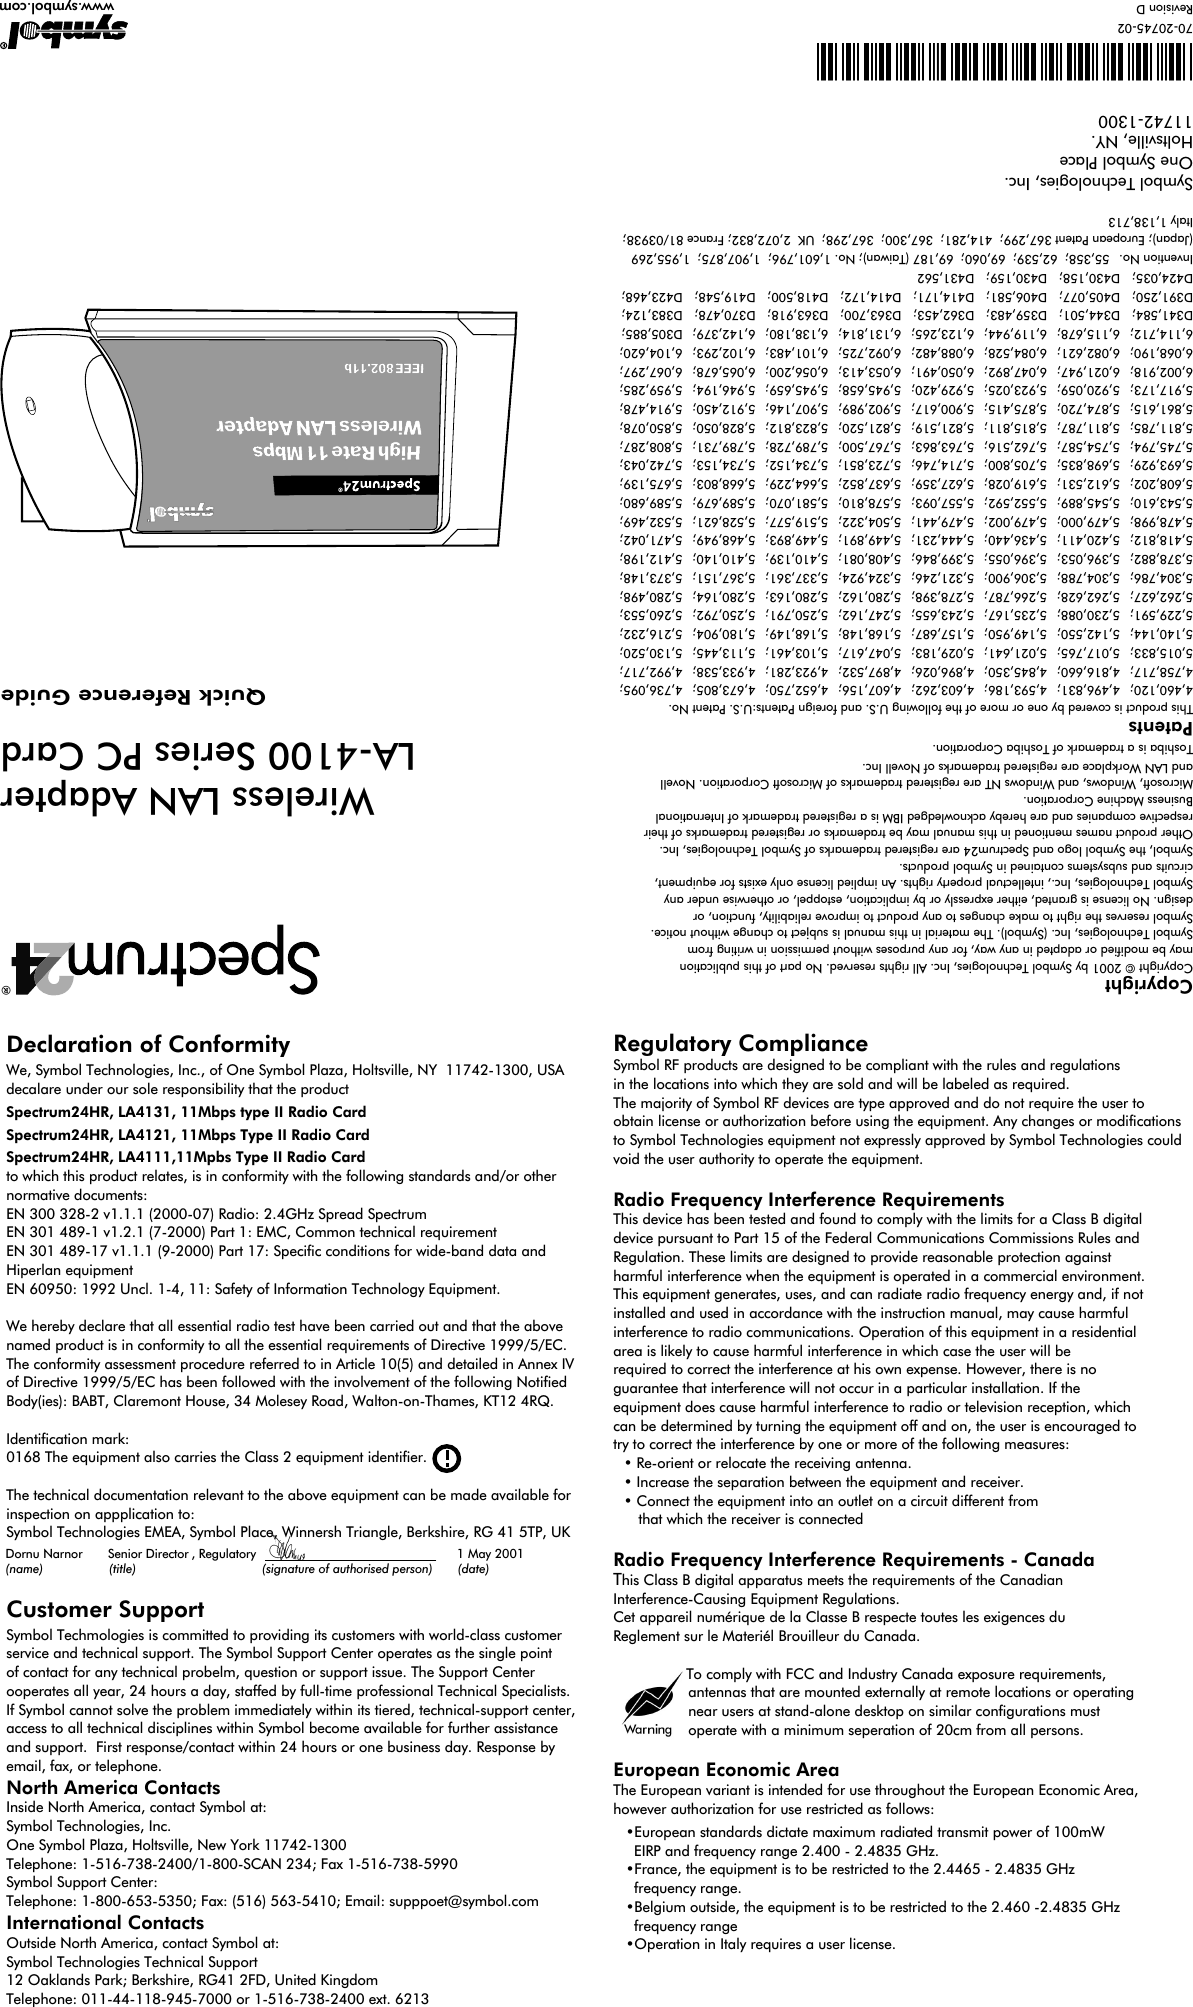 CopyrightCopyright © 2001 by Symbol Technologies, Inc. All rights reserved. No part of this publication may be modified or adapted in any way, for any purposes without permission in writing fromSymbol Technologies, Inc. (Symbol). The material in this manual is subject to change without notice. Symbol reserves the right to make changes to any product to improve reliability, function, or design. No license is granted, either expressly or by implication, estoppel, or otherwise under anySymbol Technologies, Inc., intellectual property rights. An implied license only exists for equipment,circuits and subsystems contained in Symbol products.Symbol, the Symbol logo and Spectrum24 are registered trademarks of Symbol Technologies, Inc.Other product names mentioned in this manual may be trademarks or registered trademarks of their respective companies and are hereby acknowledged IBM is a registered trademark of International Business Machine Corporation.Microsoft, Windows, and Windows NT are registered trademarks of Microsoft Corporation. Novelland LAN Workplace are registered trademarks of Novell Inc.Toshiba is a trademark of Toshiba Corporation.PatentsThis product is covered by one or more of the following U.S. and foreign Patents:U.S. Patent No.4,460,120;  4,496,831;  4,593,186;  4,603,262;  4,607,156;  4,652,750;  4,673,805;  4,736,095; 4,758,717;  4,816,660;  4,845,350;  4,896,026;  4,897,532;  4,923,281;  4,933,538;  4,992,717; 5,015,833;  5,017,765;  5,021,641;  5,029,183;  5,047,617;  5,103,461;  5,113,445;   5,130,520; 5,140,144;  5,142,550;  5,149,950;  5,157,687;  5,168,148;  5,168,149;  5,180,904;  5,216,232; 5,229,591;  5,230,088;  5,235,167;  5,243,655;  5,247,162;  5,250,791;  5,250,792;  5,260,553; 5,262,627;  5,262,628;  5,266,787;  5,278,398;  5,280,162;  5,280,163;  5,280,164;  5,280,498; 5,304,786;  5,304,788;  5,306,900;  5,321,246;  5,324,924;  5,337,361;  5,367,151;  5,373,148; 5,378,882;  5,396,053;  5,396,055;  5,399,846;  5,408,081;  5,410,139;  5,410,140;  5,412,198; 5,418,812;  5,420,411;  5,436,440;  5,444,231;  5,449,891;  5,449,893;  5,468,949;  5,471,042; 5,478,998;  5,479,000;  5,479,002;  5,479,441;  5,504,322;  5,519,577;  5,528,621;  5,532,469; 5,543,610;  5,545,889;  5,552,592;  5,557,093;  5,578,810;  5,581,070;  5,589,679;  5,589,680; 5,608,202;  5,612,531;  5,619,028;  5,627,359;  5,637,852;  5,664,229;  5,668,803;  5,675,139; 5,693,929;  5,698,835;  5,705,800;  5,714,746;  5,723,851;  5,734,152;  5,734,153;  5,742,043; 5,745,794;  5,754,587;  5,762,516;  5,763,863;   5,767,500;  5,789,728;  5,789,731;  5,808,287; 5,811,785;  5,811,787;  5,815,811;  5,821,519;   5,821,520;   5,823,812;  5,828,050;  5,850,078; 5,861,615;  5,874,720;  5,875,415;  5,900,617;  5,902,989;  5,907,146;  5,912,450;  5,914,478; 5,917,173;  5,920,059;  5,923,025;  5,929,420;  5,945,658;  5,945,659;  5,946,194;  5,959,285; 6,002,918;  6,021,947;  6,047,892;  6,050,491;  6,053,413;  6,056,200;  6,065,678;  6,067,297; 6,068,190;  6,082,621;  6,084,528;  6,088,482;  6,092,725;  6,101,483;  6,102,293;  6,104,620; 6,114,712;  6,115,678;  6,119,944;  6,123,265;  6,131,814;  6,138,180;  6,142,379;  D305,885; D341,584;   D344,501;   D359,483;   D362,453;   D363,700;   D363,918;   D370,478;   D383,124; D391,250;   D405,077;   D406,581;   D414,171;   D414,172;   D418,500;   D419,548;   D423,468; D424,035;   D430,158;   D430,159;   D431,562Invention No.  55,358;  62,539;  69,060;  69,187 (Taiwan); No. 1,601,796;  1,907,875;  1,955,269 (Japan); European Patent 367,299;  414,281;  367,300;  367,298;  UK  2,072,832; France 81/03938; Italy 1,138,713Symbol Technologies, Inc.One Symbol PlaceHoltsville, NY.11742-1300*70-20745-02*70-20745-02Revision D www.symbol.comQuick Reference GuideWireless LAN AdapterLA-4100 Series PC Card  Declaration of ConformityWe, Symbol Technologies, Inc., of One Symbol Plaza, Holtsville, NY  11742-1300, USA decalare under our sole responsibility that the productSpectrum24HR, LA4131, 11Mbps type II Radio CardSpectrum24HR, LA4121, 11Mbps Type II Radio CardSpectrum24HR, LA4111,11Mpbs Type II Radio Cardto which this product relates, is in conformity with the following standards and/or other normative documents:EN 300 328-2 v1.1.1 (2000-07) Radio: 2.4GHz Spread SpectrumEN 301 489-1 v1.2.1 (7-2000) Part 1: EMC, Common technical requirementEN 301 489-17 v1.1.1 (9-2000) Part 17: Specic conditions for wide-band data and Hiperlan equipmentEN 60950: 1992 Uncl. 1-4, 11: Safety of Information Technology Equipment.We hereby declare that all essential radio test have been carried out and that the above named product is in conformity to all the essential requirements of Directive 1999/5/EC.The conformity assessment procedure referred to in Article 10(5) and detailed in Annex IV of Directive 1999/5/EC has been followed with the involvement of the following Notified Body(ies): BABT, Claremont House, 34 Molesey Road, Walton-on-Thames, KT12 4RQ.Identification mark:0168 The equipment also carries the Class 2 equipment identifier.The technical documentation relevant to the above equipment can be made available for inspection on appplication to:Symbol Technologies EMEA, Symbol Place, Winnersh Triangle, Berkshire, RG 41 5TP, UKCustomer SupportSymbol Techmologies is committed to providing its customers with world-class customer service and technical support. The Symbol Support Center operates as the single point of contact for any technical probelm, question or support issue. The Support Center ooperates all year, 24 hours a day, staffed by full-time professional Technical Specialists. If Symbol cannot solve the problem immediately within its tiered, technical-support center, access to all technical disciplines within Symbol become available for further assistance and support.  First response/contact within 24 hours or one business day. Response by email, fax, or telephone.North America ContactsInside North America, contact Symbol at:Symbol Technologies, Inc.One Symbol Plaza, Holtsville, New York 11742-1300Telephone: 1-516-738-2400/1-800-SCAN 234; Fax 1-516-738-5990Symbol Support Center:Telephone: 1-800-653-5350; Fax: (516) 563-5410; Email: supppoet@symbol.comInternational ContactsOutside North America, contact Symbol at:Symbol Technologies Technical Support12 Oaklands Park; Berkshire, RG41 2FD, United KingdomTelephone: 011-44-118-945-7000 or 1-516-738-2400 ext. 6213         7 September 2000Dornu Narnor       Senior Director , Regulatory                      (name)        (title)         (signature of authorised person)       (date)1 May 2001Regulatory ComplianceSymbol RF products are designed to be compliant with the rules and regulationsin the locations into which they are sold and will be labeled as required.The majority of Symbol RF devices are type approved and do not require the user to obtain license or authorization before using the equipment. Any changes or modificationsto Symbol Technologies equipment not expressly approved by Symbol Technologies could void the user authority to operate the equipment.Radio Frequency Interference RequirementsThis device has been tested and found to comply with the limits for a Class B digitaldevice pursuant to Part 15 of the Federal Communications Commissions Rules andRegulation. These limits are designed to provide reasonable protection against harmful interference when the equipment is operated in a commercial environment.This equipment generates, uses, and can radiate radio frequency energy and, if notinstalled and used in accordance with the instruction manual, may cause harmfulinterference to radio communications. Operation of this equipment in a residentialarea is likely to cause harmful interference in which case the user will be required to correct the interference at his own expense. However, there is no guarantee that interference will not occur in a particular installation. If the equipment does cause harmful interference to radio or television reception, whichcan be determined by turning the equipment off and on, the user is encouraged totry to correct the interference by one or more of the following measures:• Re-orient or relocate the receiving antenna.• Increase the separation between the equipment and receiver.• Connect the equipment into an outlet on a circuit different from   that which the receiver is connectedRadio Frequency Interference Requirements - CanadaThis Class B digital apparatus meets the requirements of the CanadianInterference-Causing Equipment Regulations.Cet appareil numérique de la Classe B respecte toutes les exigences du Reglement sur le Materiél Brouilleur du Canada.To comply with FCC and Industry Canada exposure requirements,    antennas that are mounted externally at remote locations or operating     near users at stand-alone desktop on similar configurations must        operate with a minimum seperation of 20cm from all persons.European Economic AreaThe European variant is intended for use throughout the European Economic Area,however authorization for use restricted as follows:•European standards dictate maximum radiated transmit power of 100mW   EIRP and frequency range 2.400 - 2.4835 GHz.•France, the equipment is to be restricted to the 2.4465 - 2.4835 GHz  frequency range. •Belgium outside, the equipment is to be restricted to the 2.460 -2.4835 GHz   frequency range•Operation in Italy requires a user license.